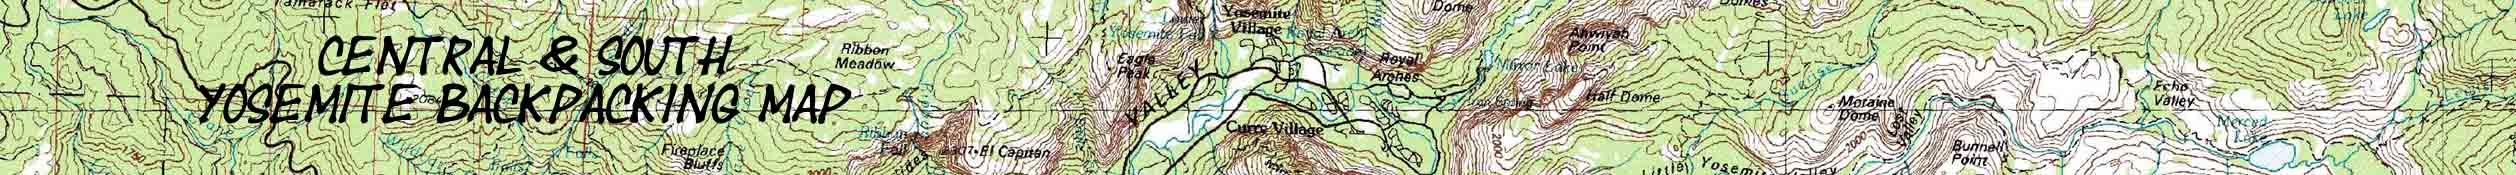 South Central Yosemite backpacking map.